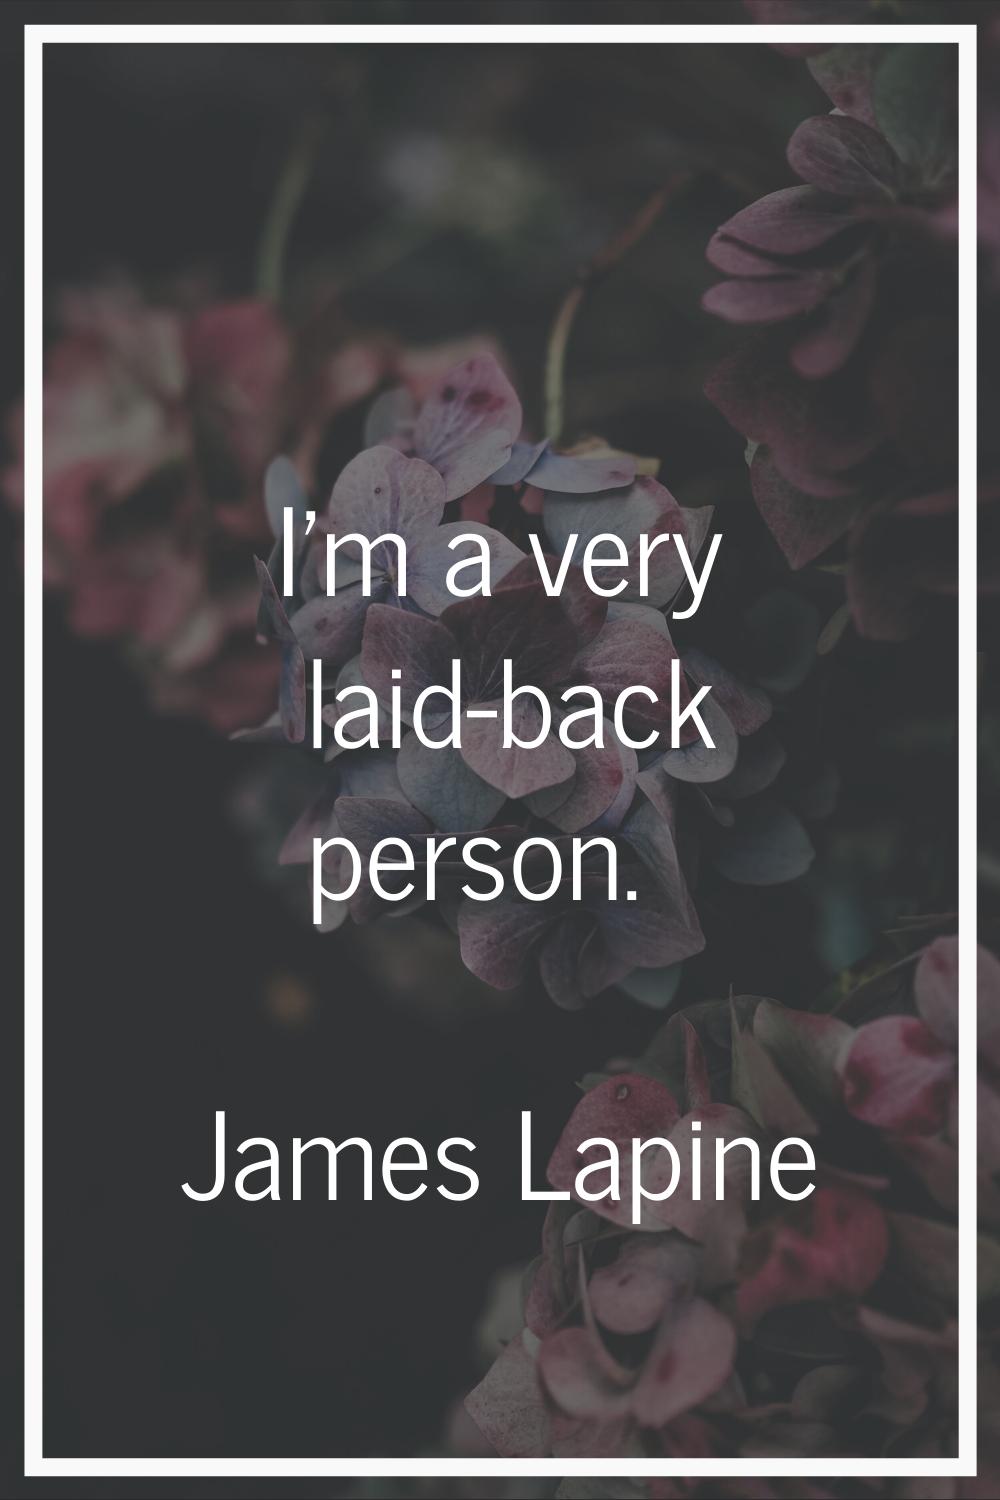 I'm a very laid-back person.